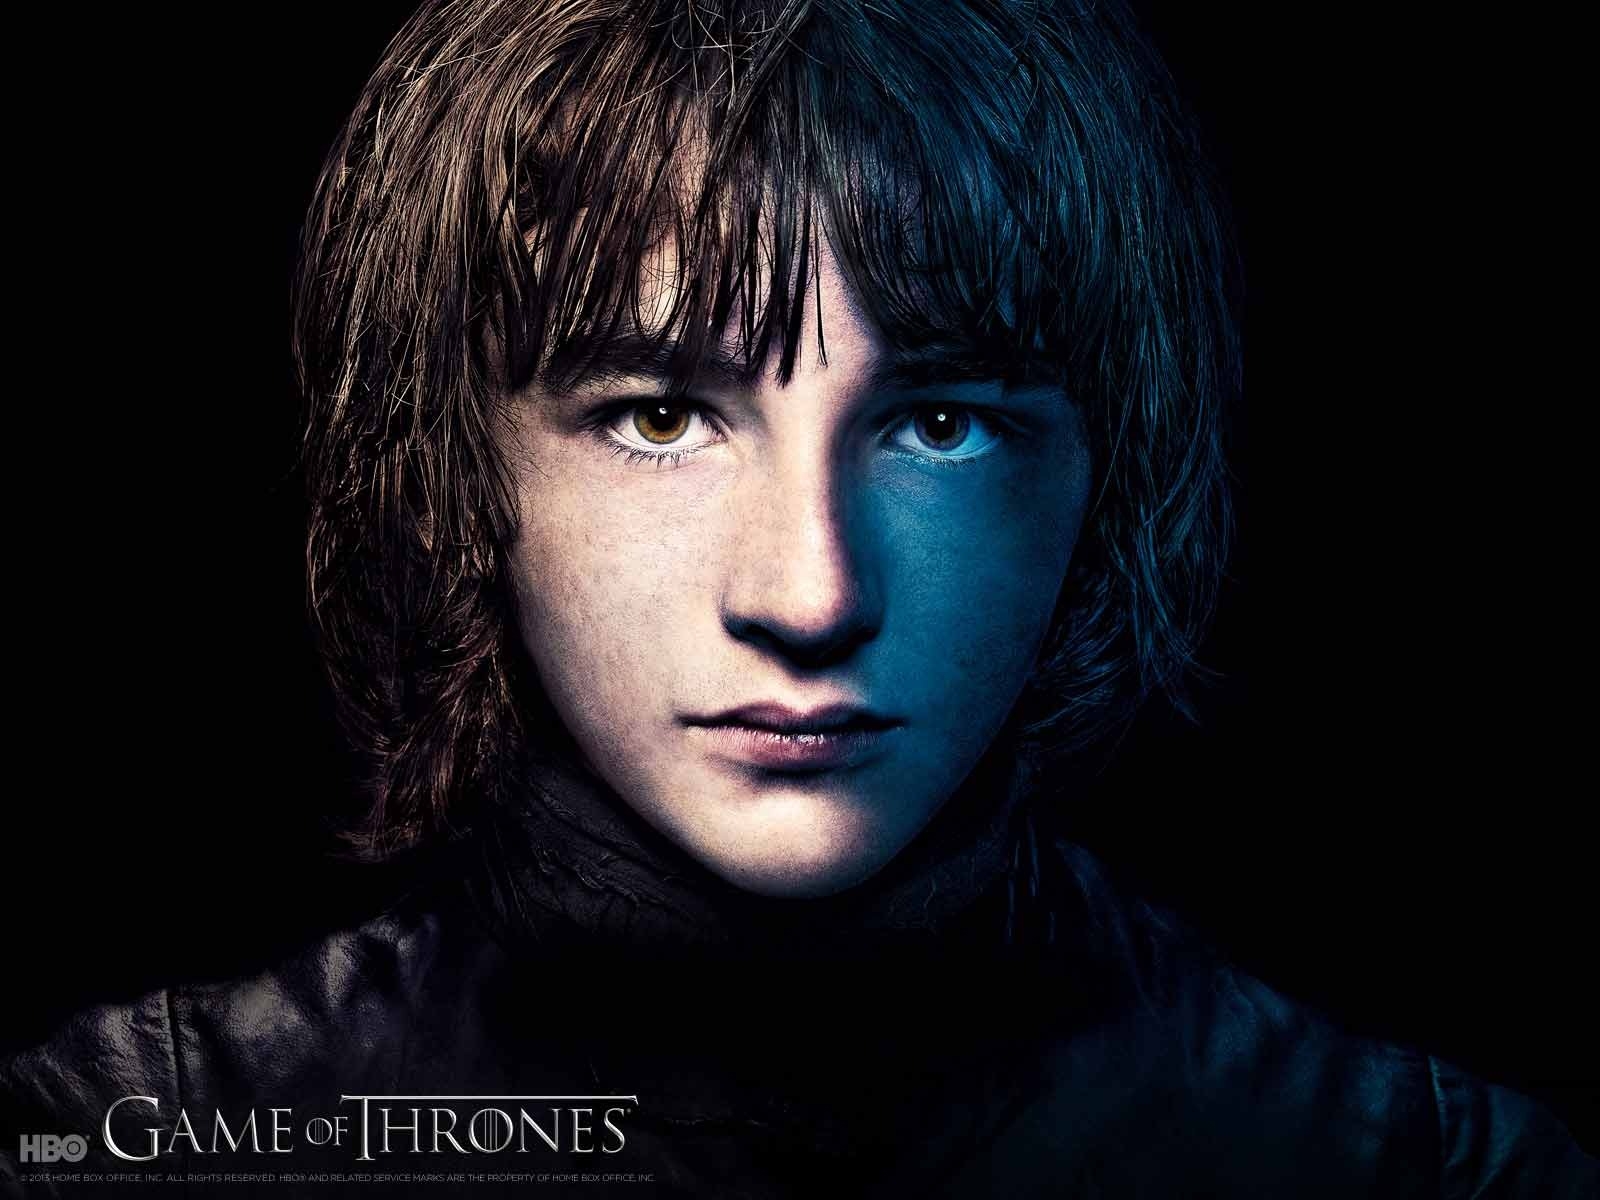 Bran Stark in Game of Thrones for 1600 x 1200 resolution